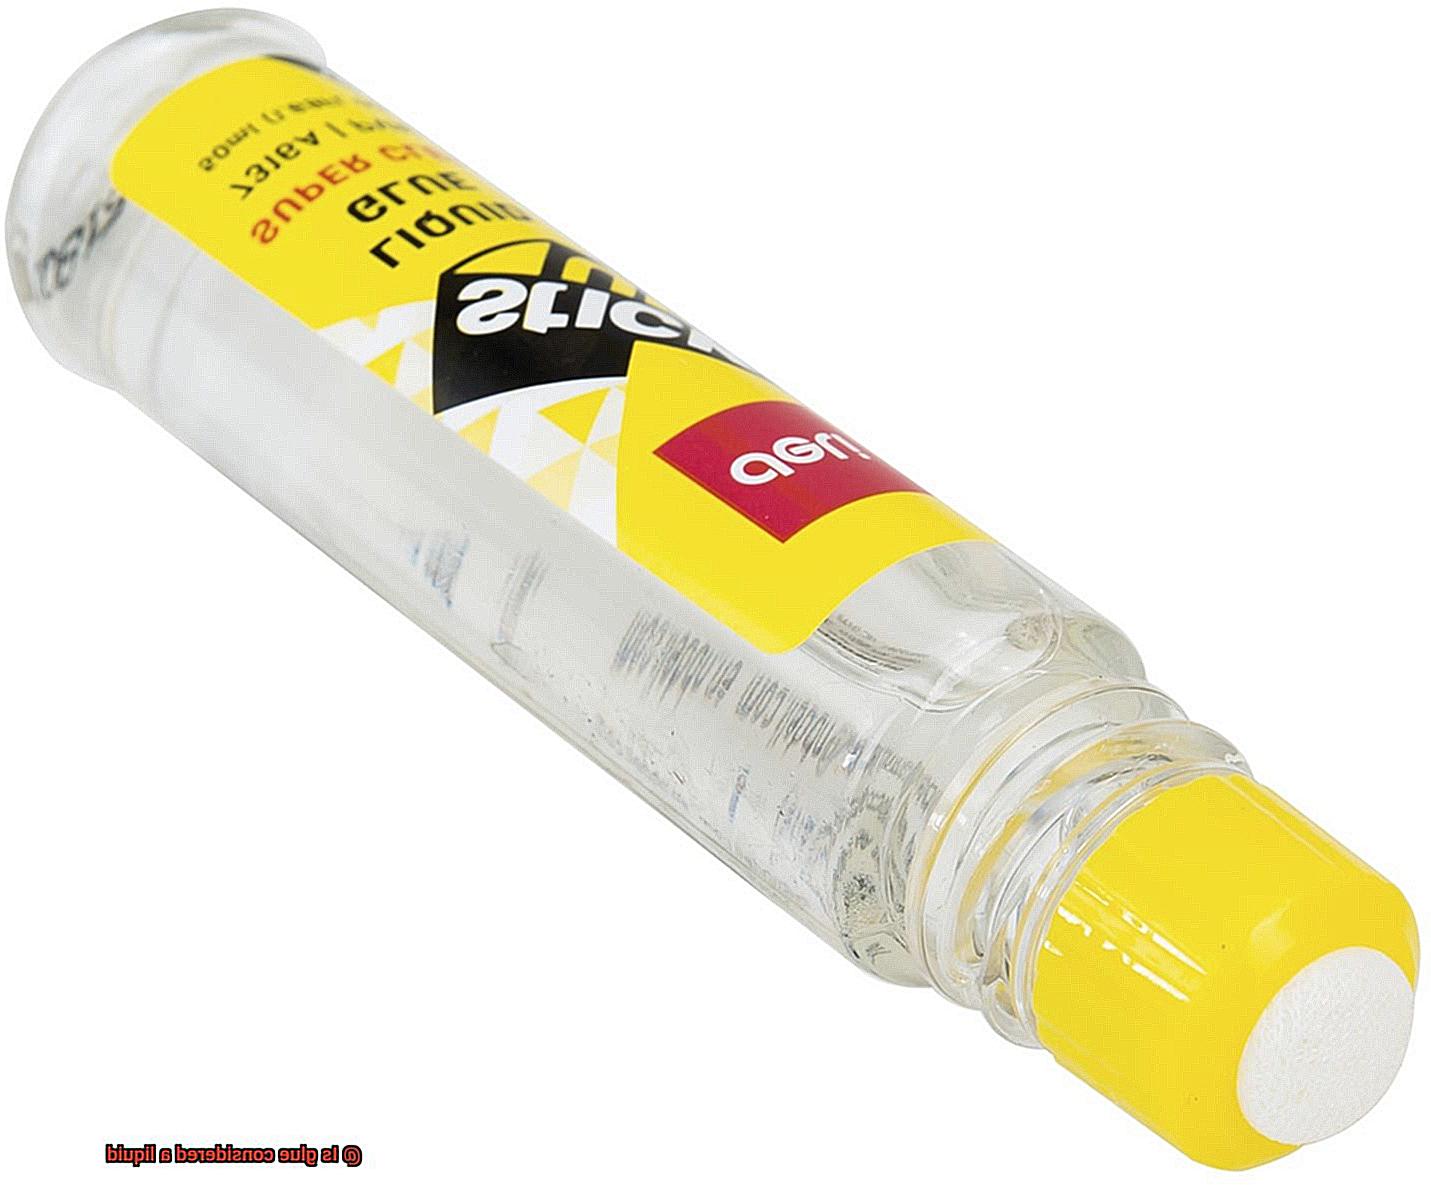 Is glue considered a liquid-3